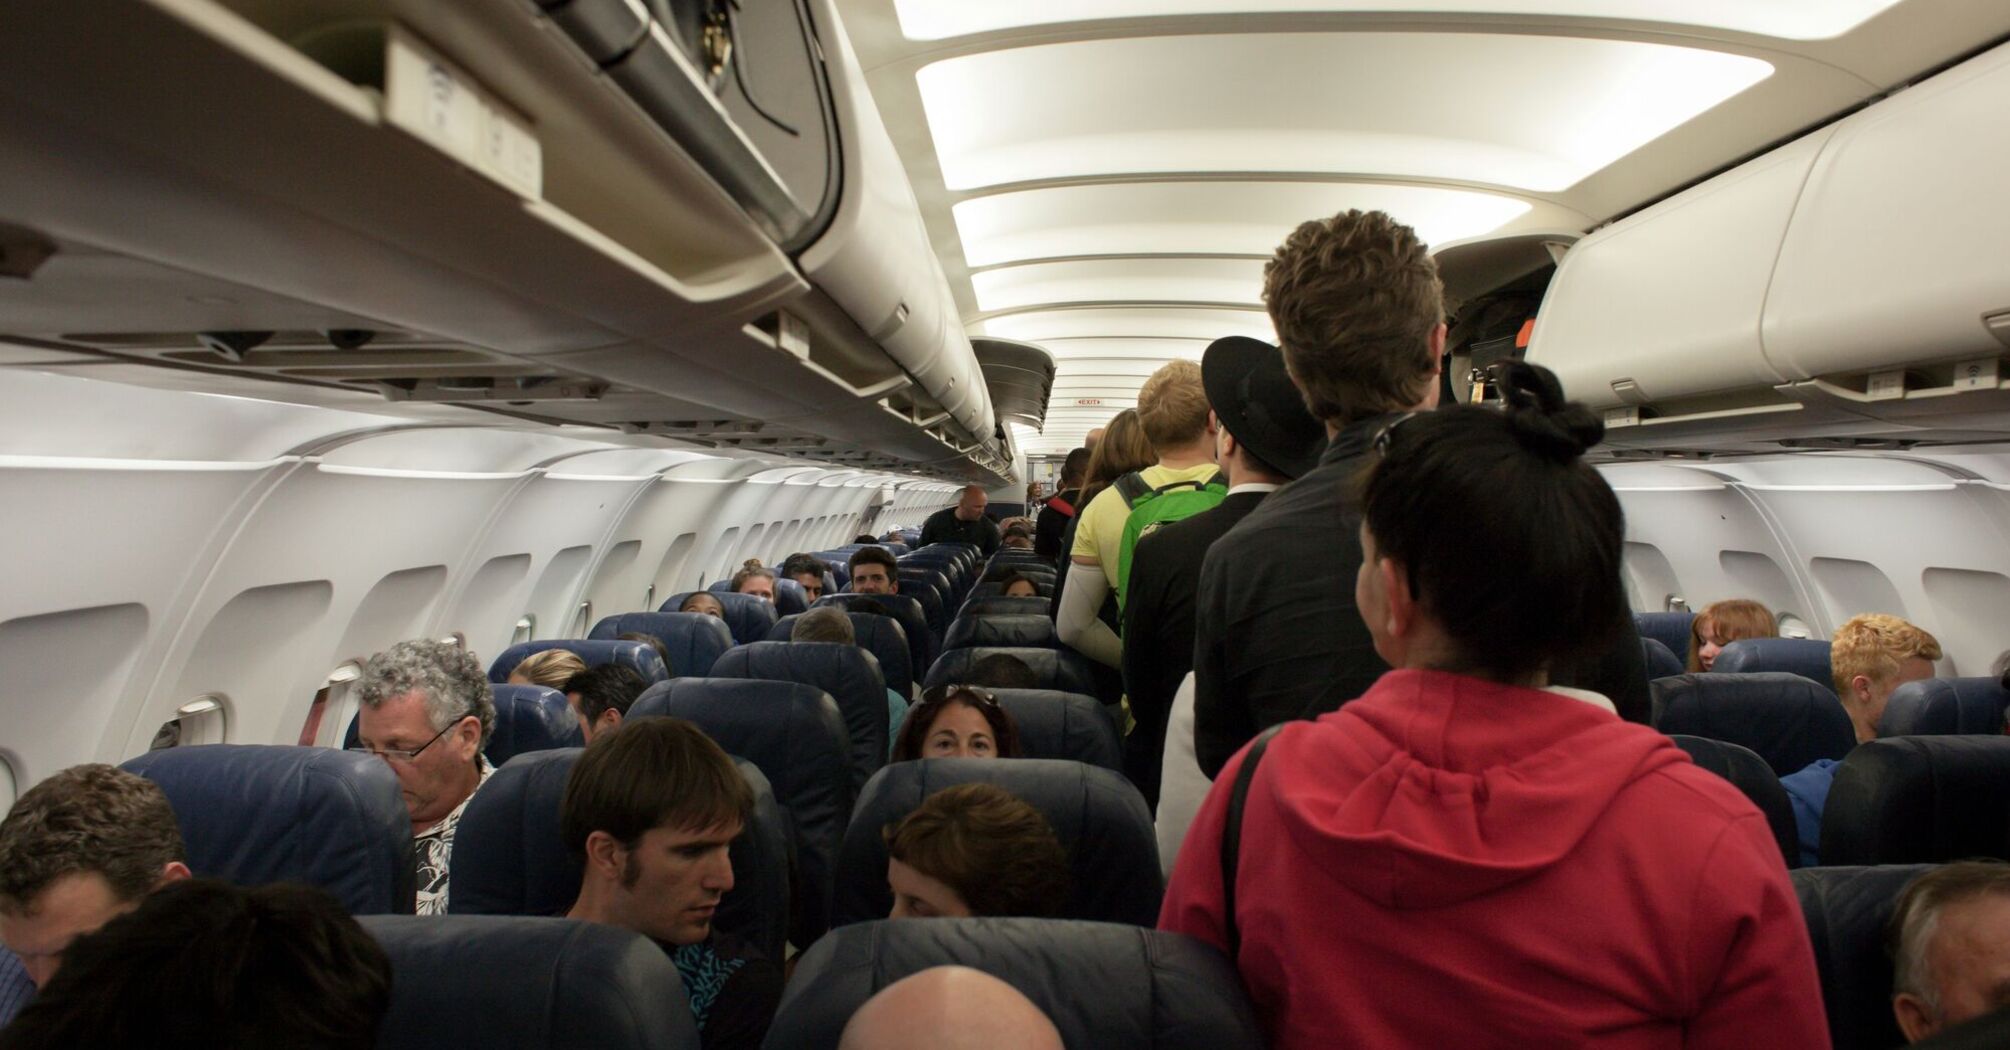 Passengers standing in the aisle of an airplane, waiting to take their seats